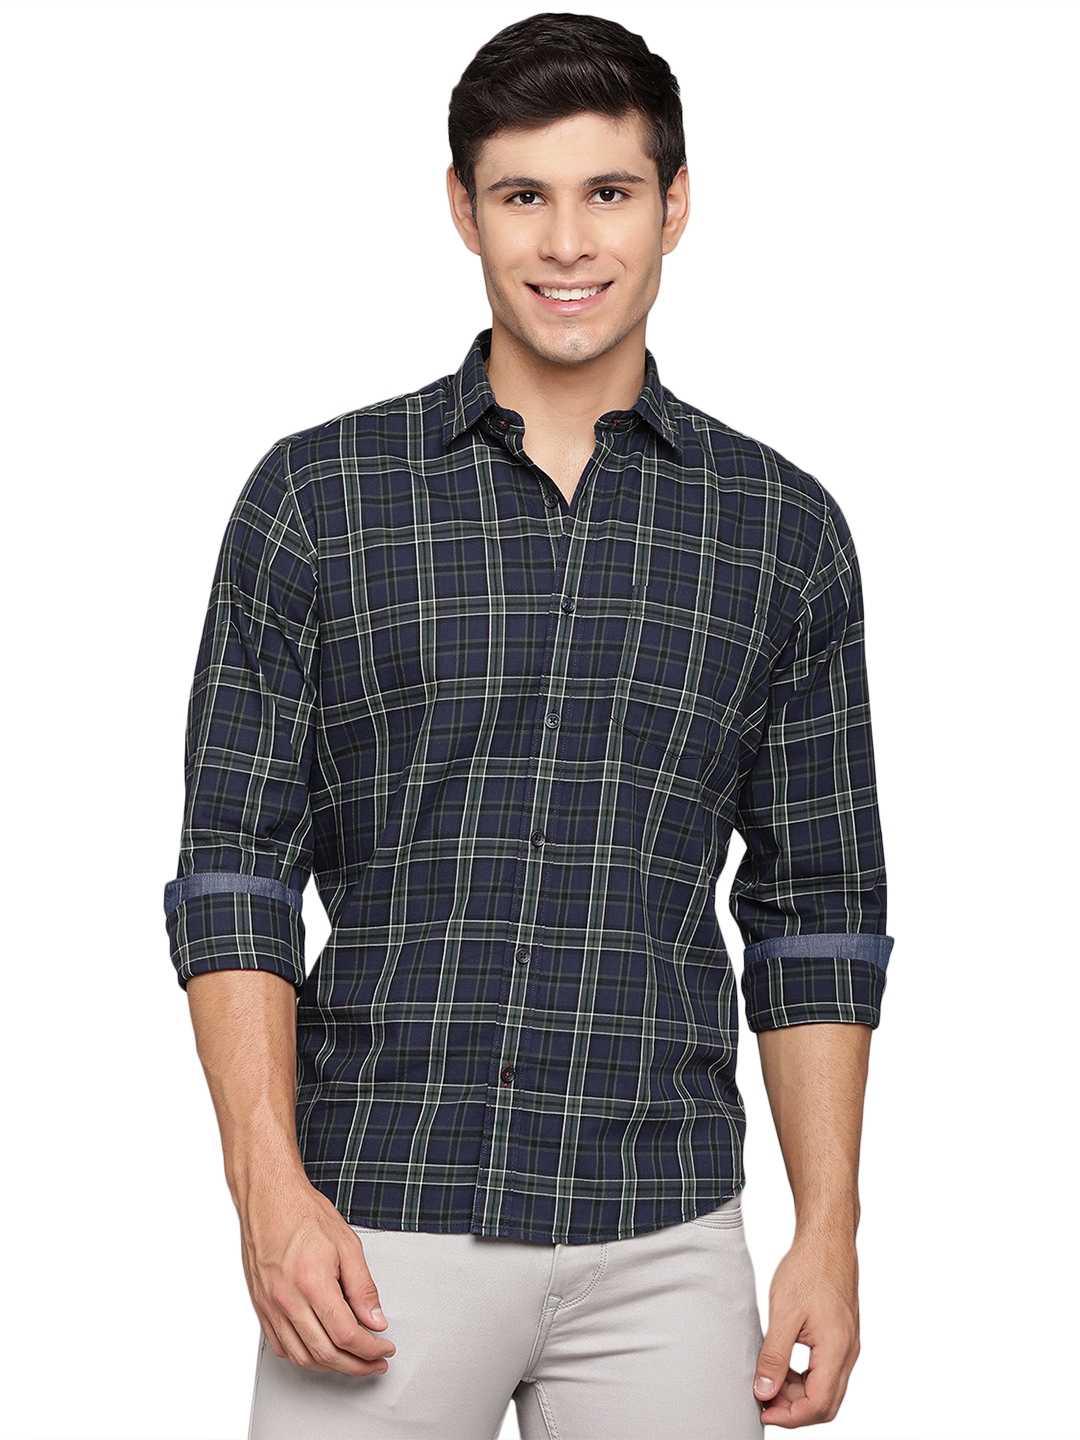 Greenfibre | Insignia Blue Checked Slim Fit Casual Shirt | Greenfibre 0